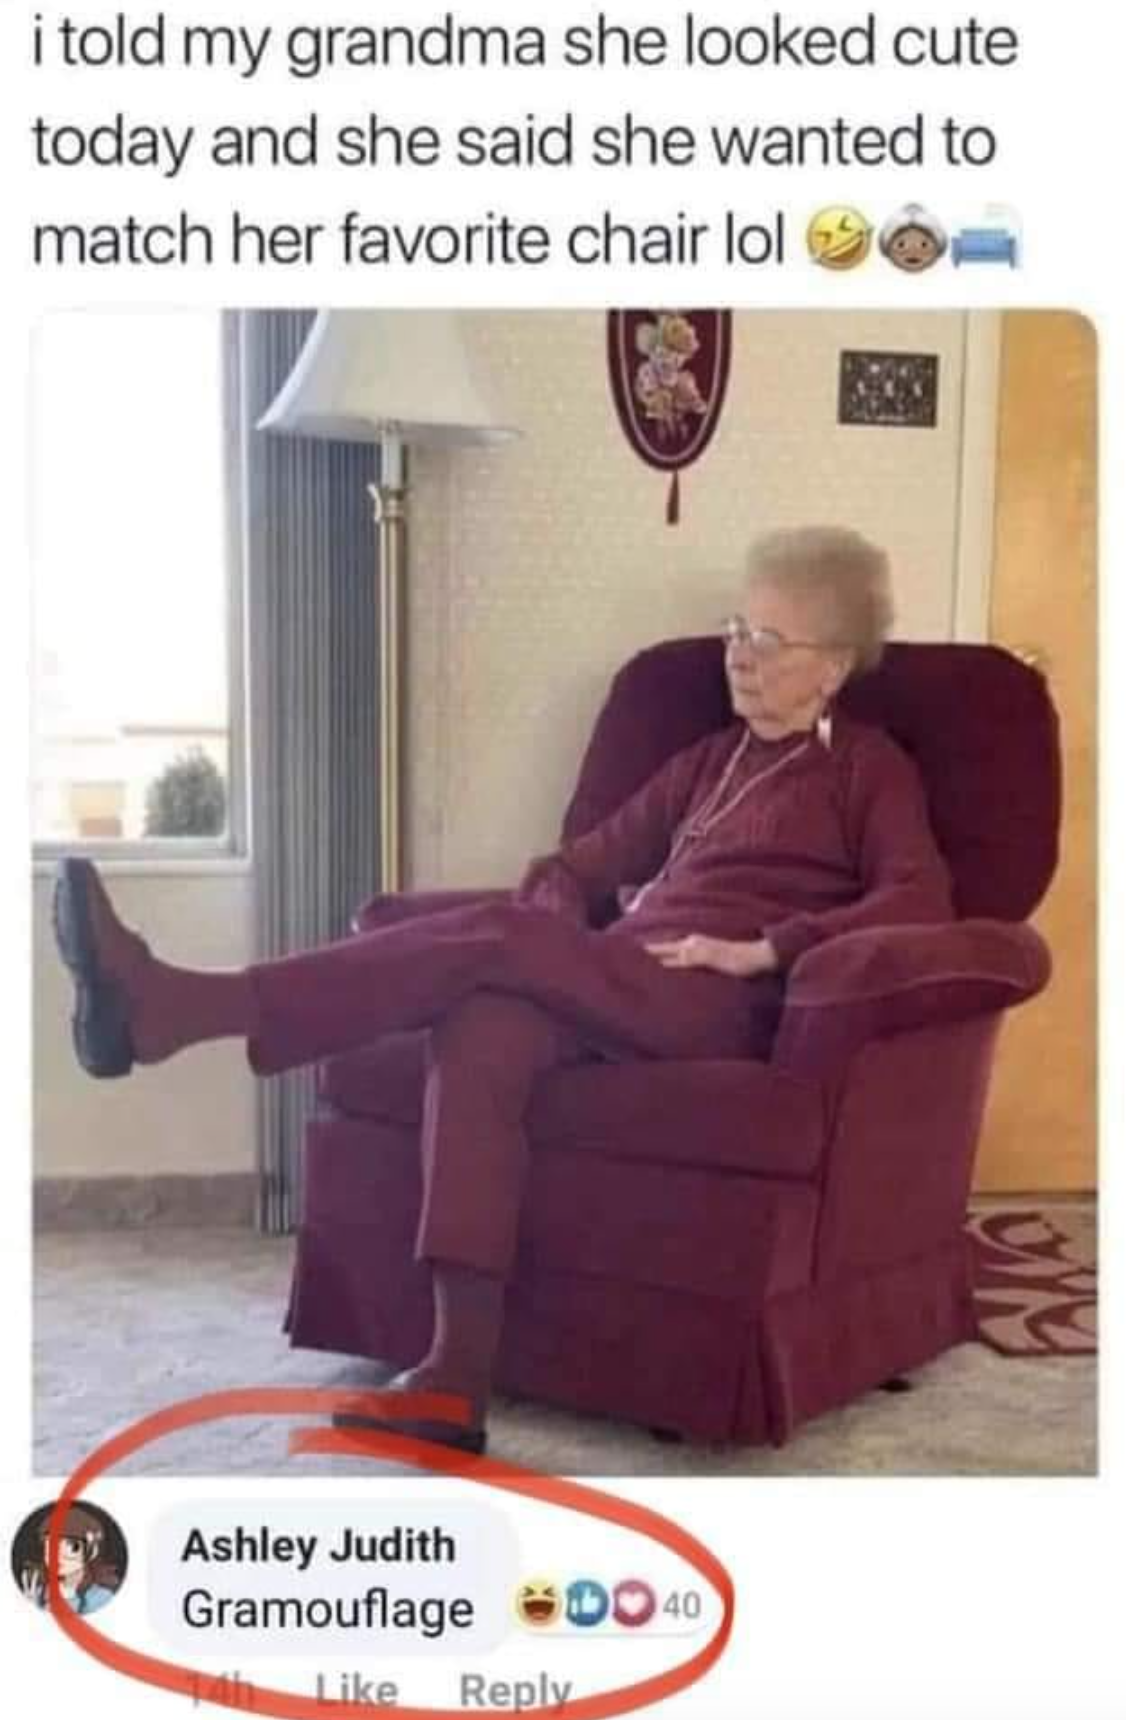 gramaflauge meme - i told my grandma she looked cute today and she said she wanted to match her favorite chair lol oly Ashley Judith Gramouflage 0040